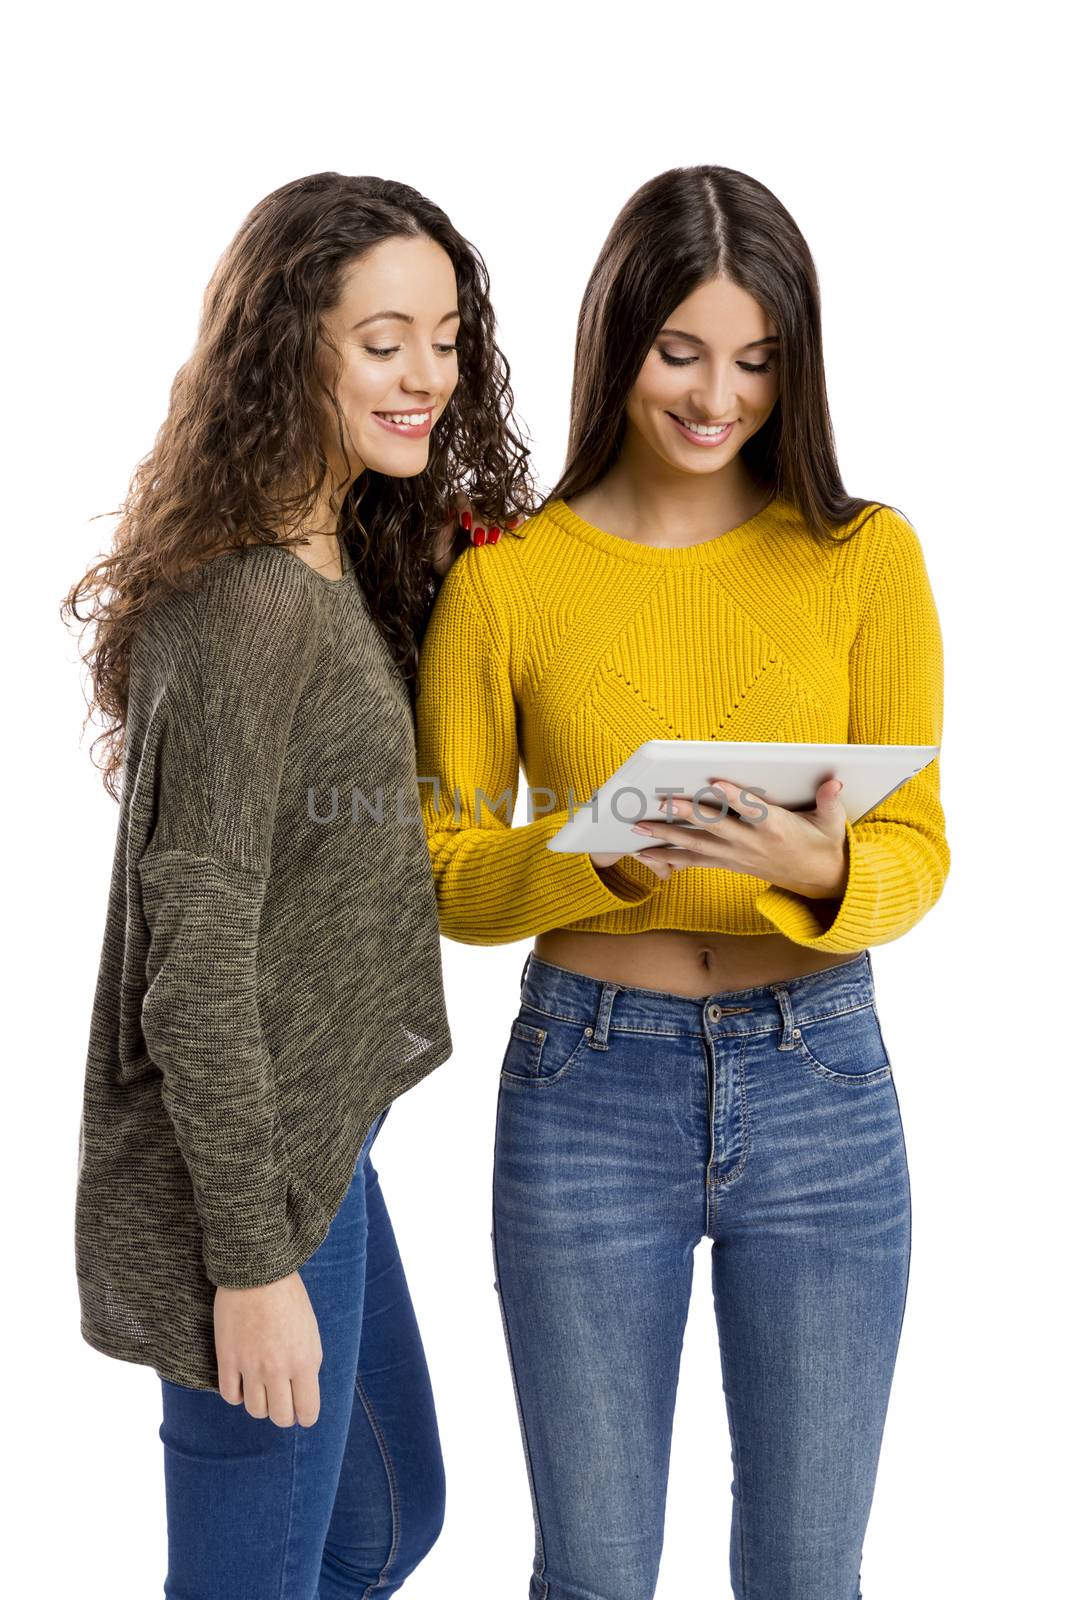 Studio portrait of two beautiful girls holding and showing something on a tablet